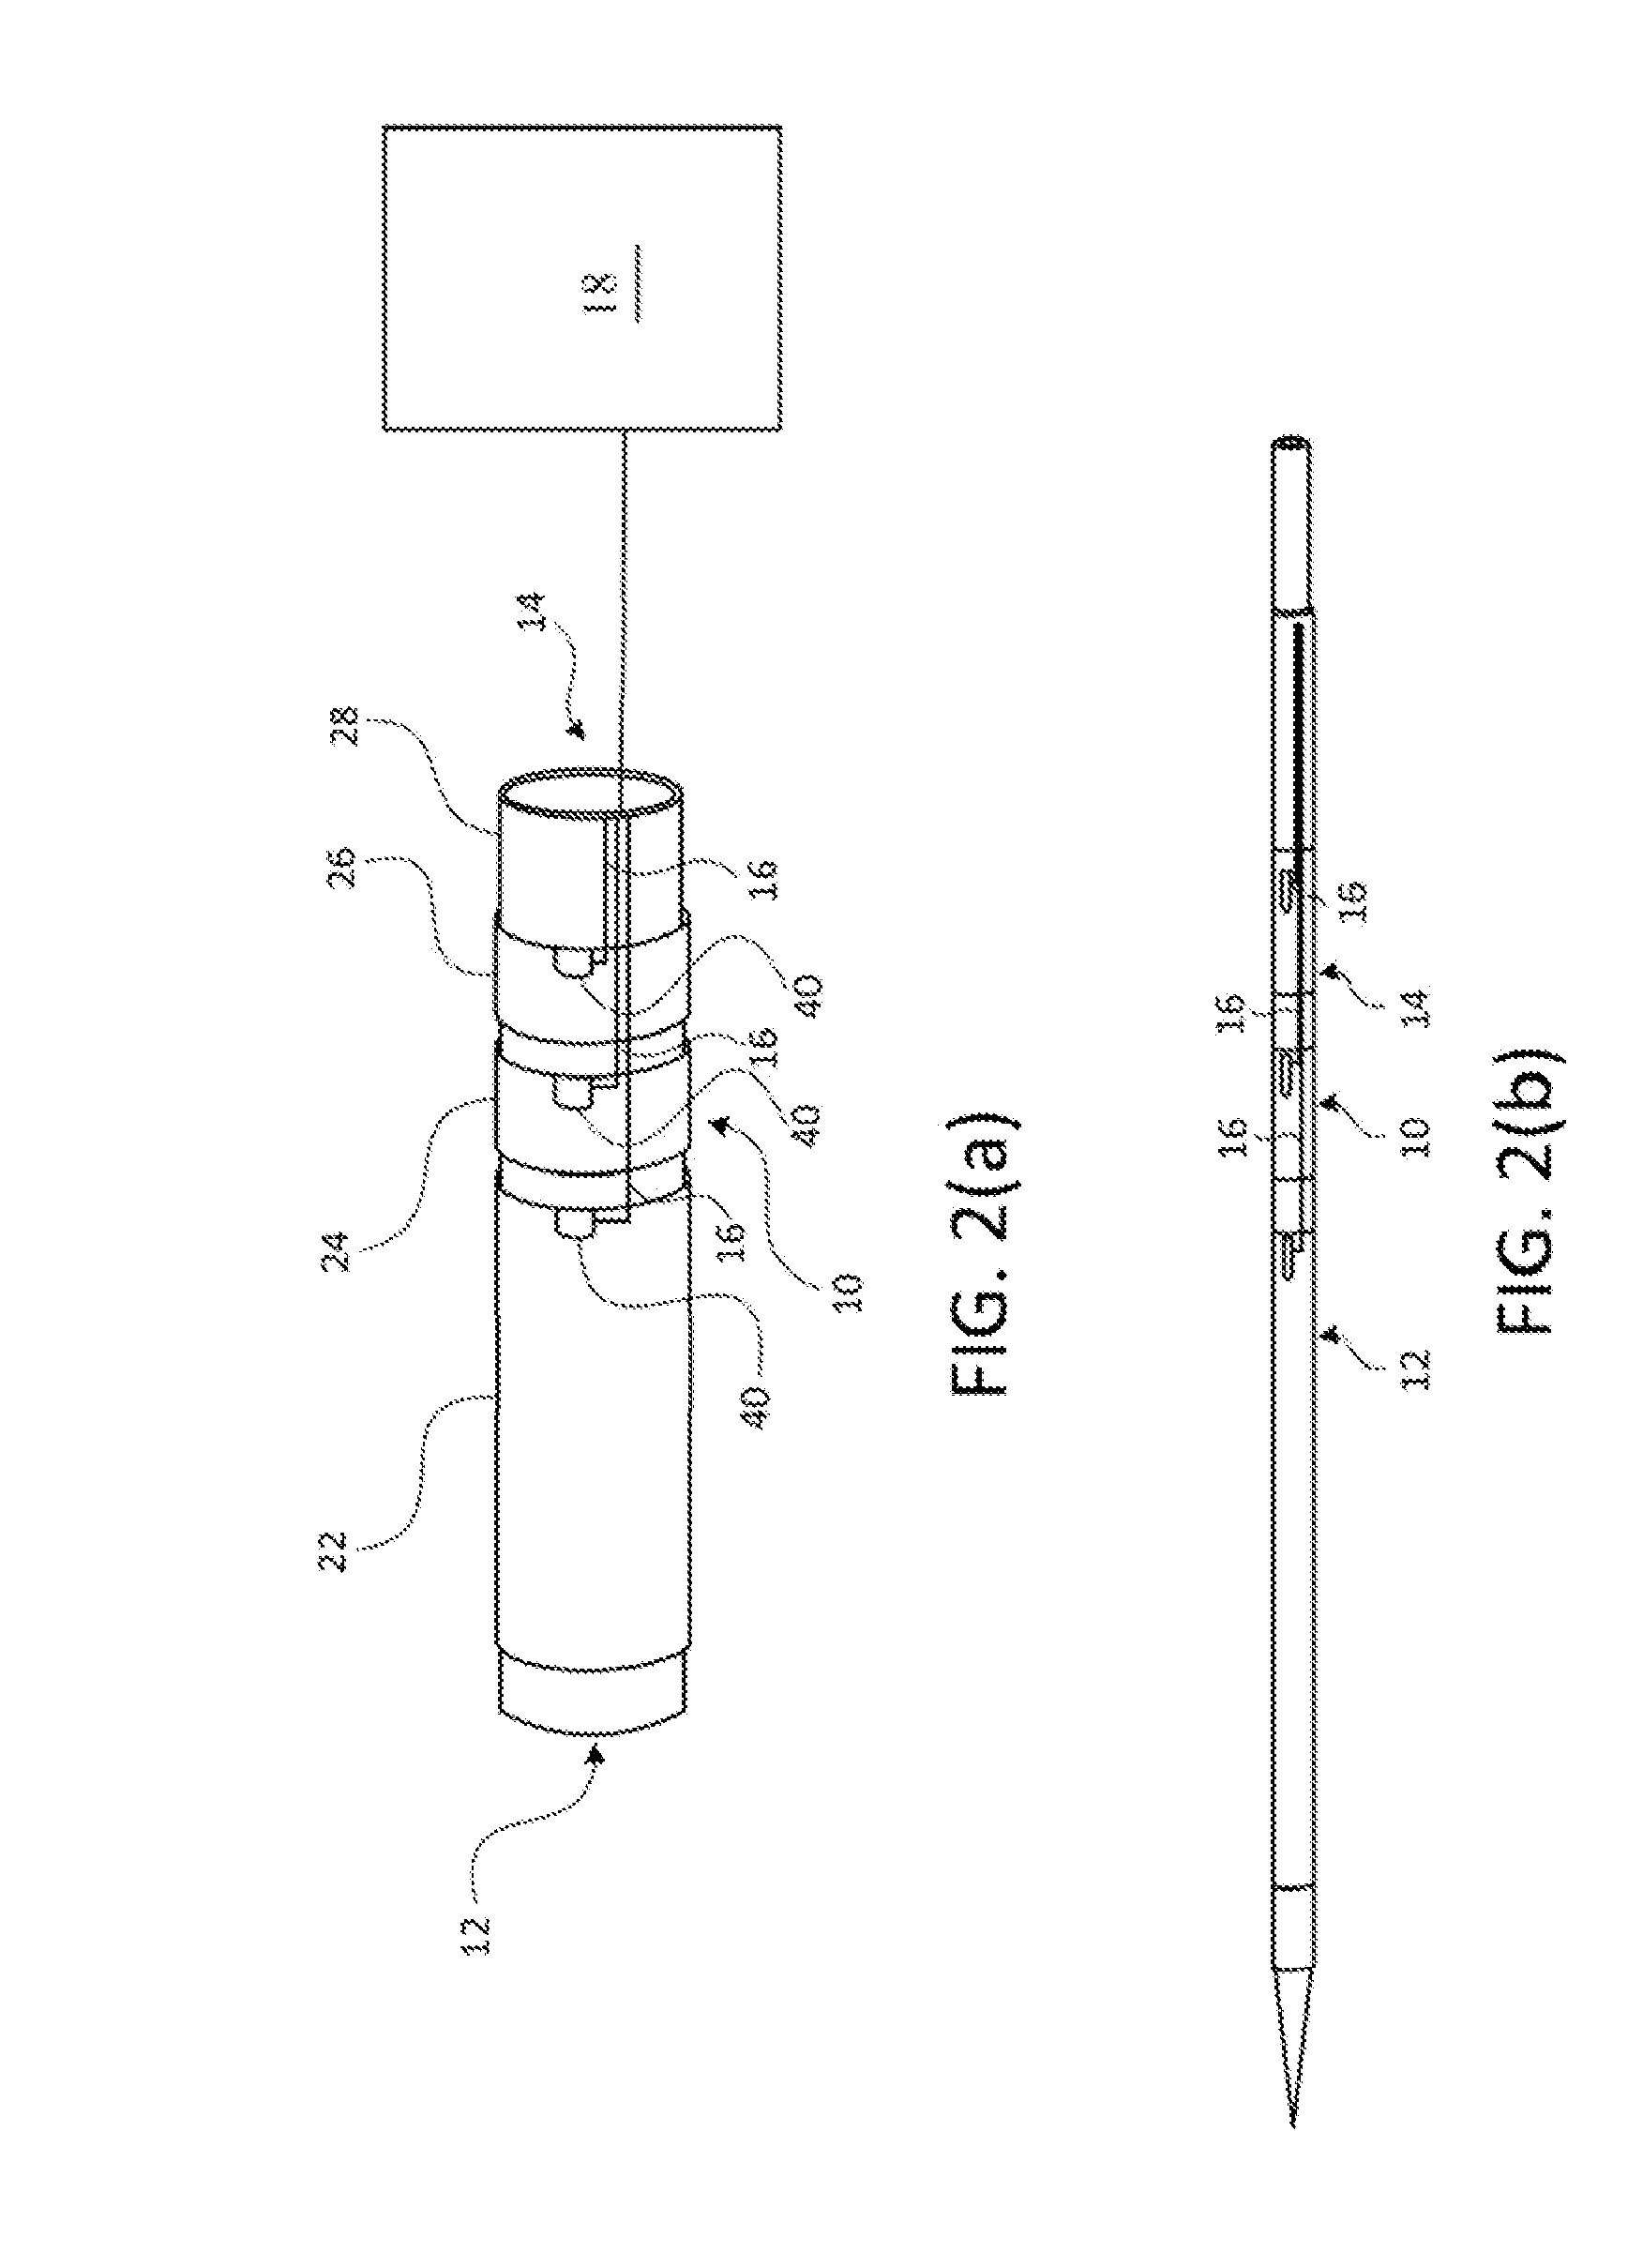 Dual-use Catheter for Continuous Analyte Measurement and Drug Delivery